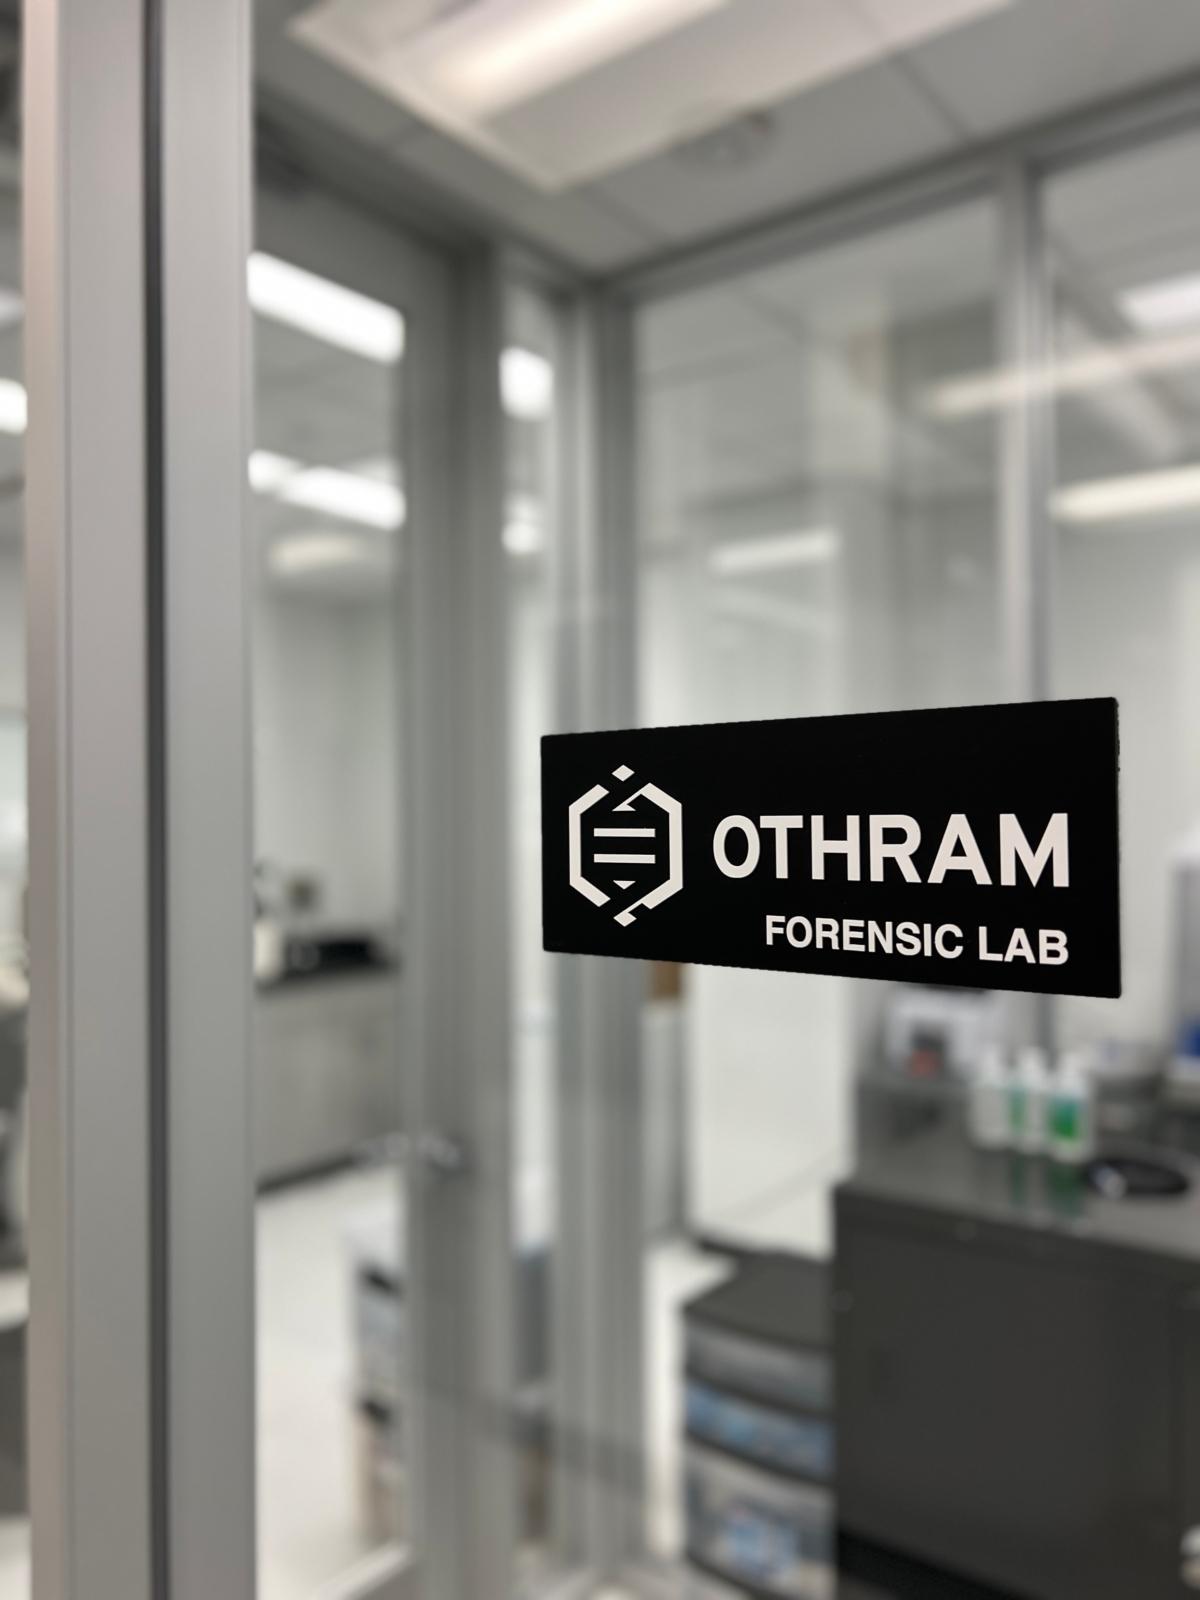 Othram in Texas, helps law enforcement agencies identify human remains and resolve missing persons cases through DNA testing. (Courtesy of Othram, Inc.)